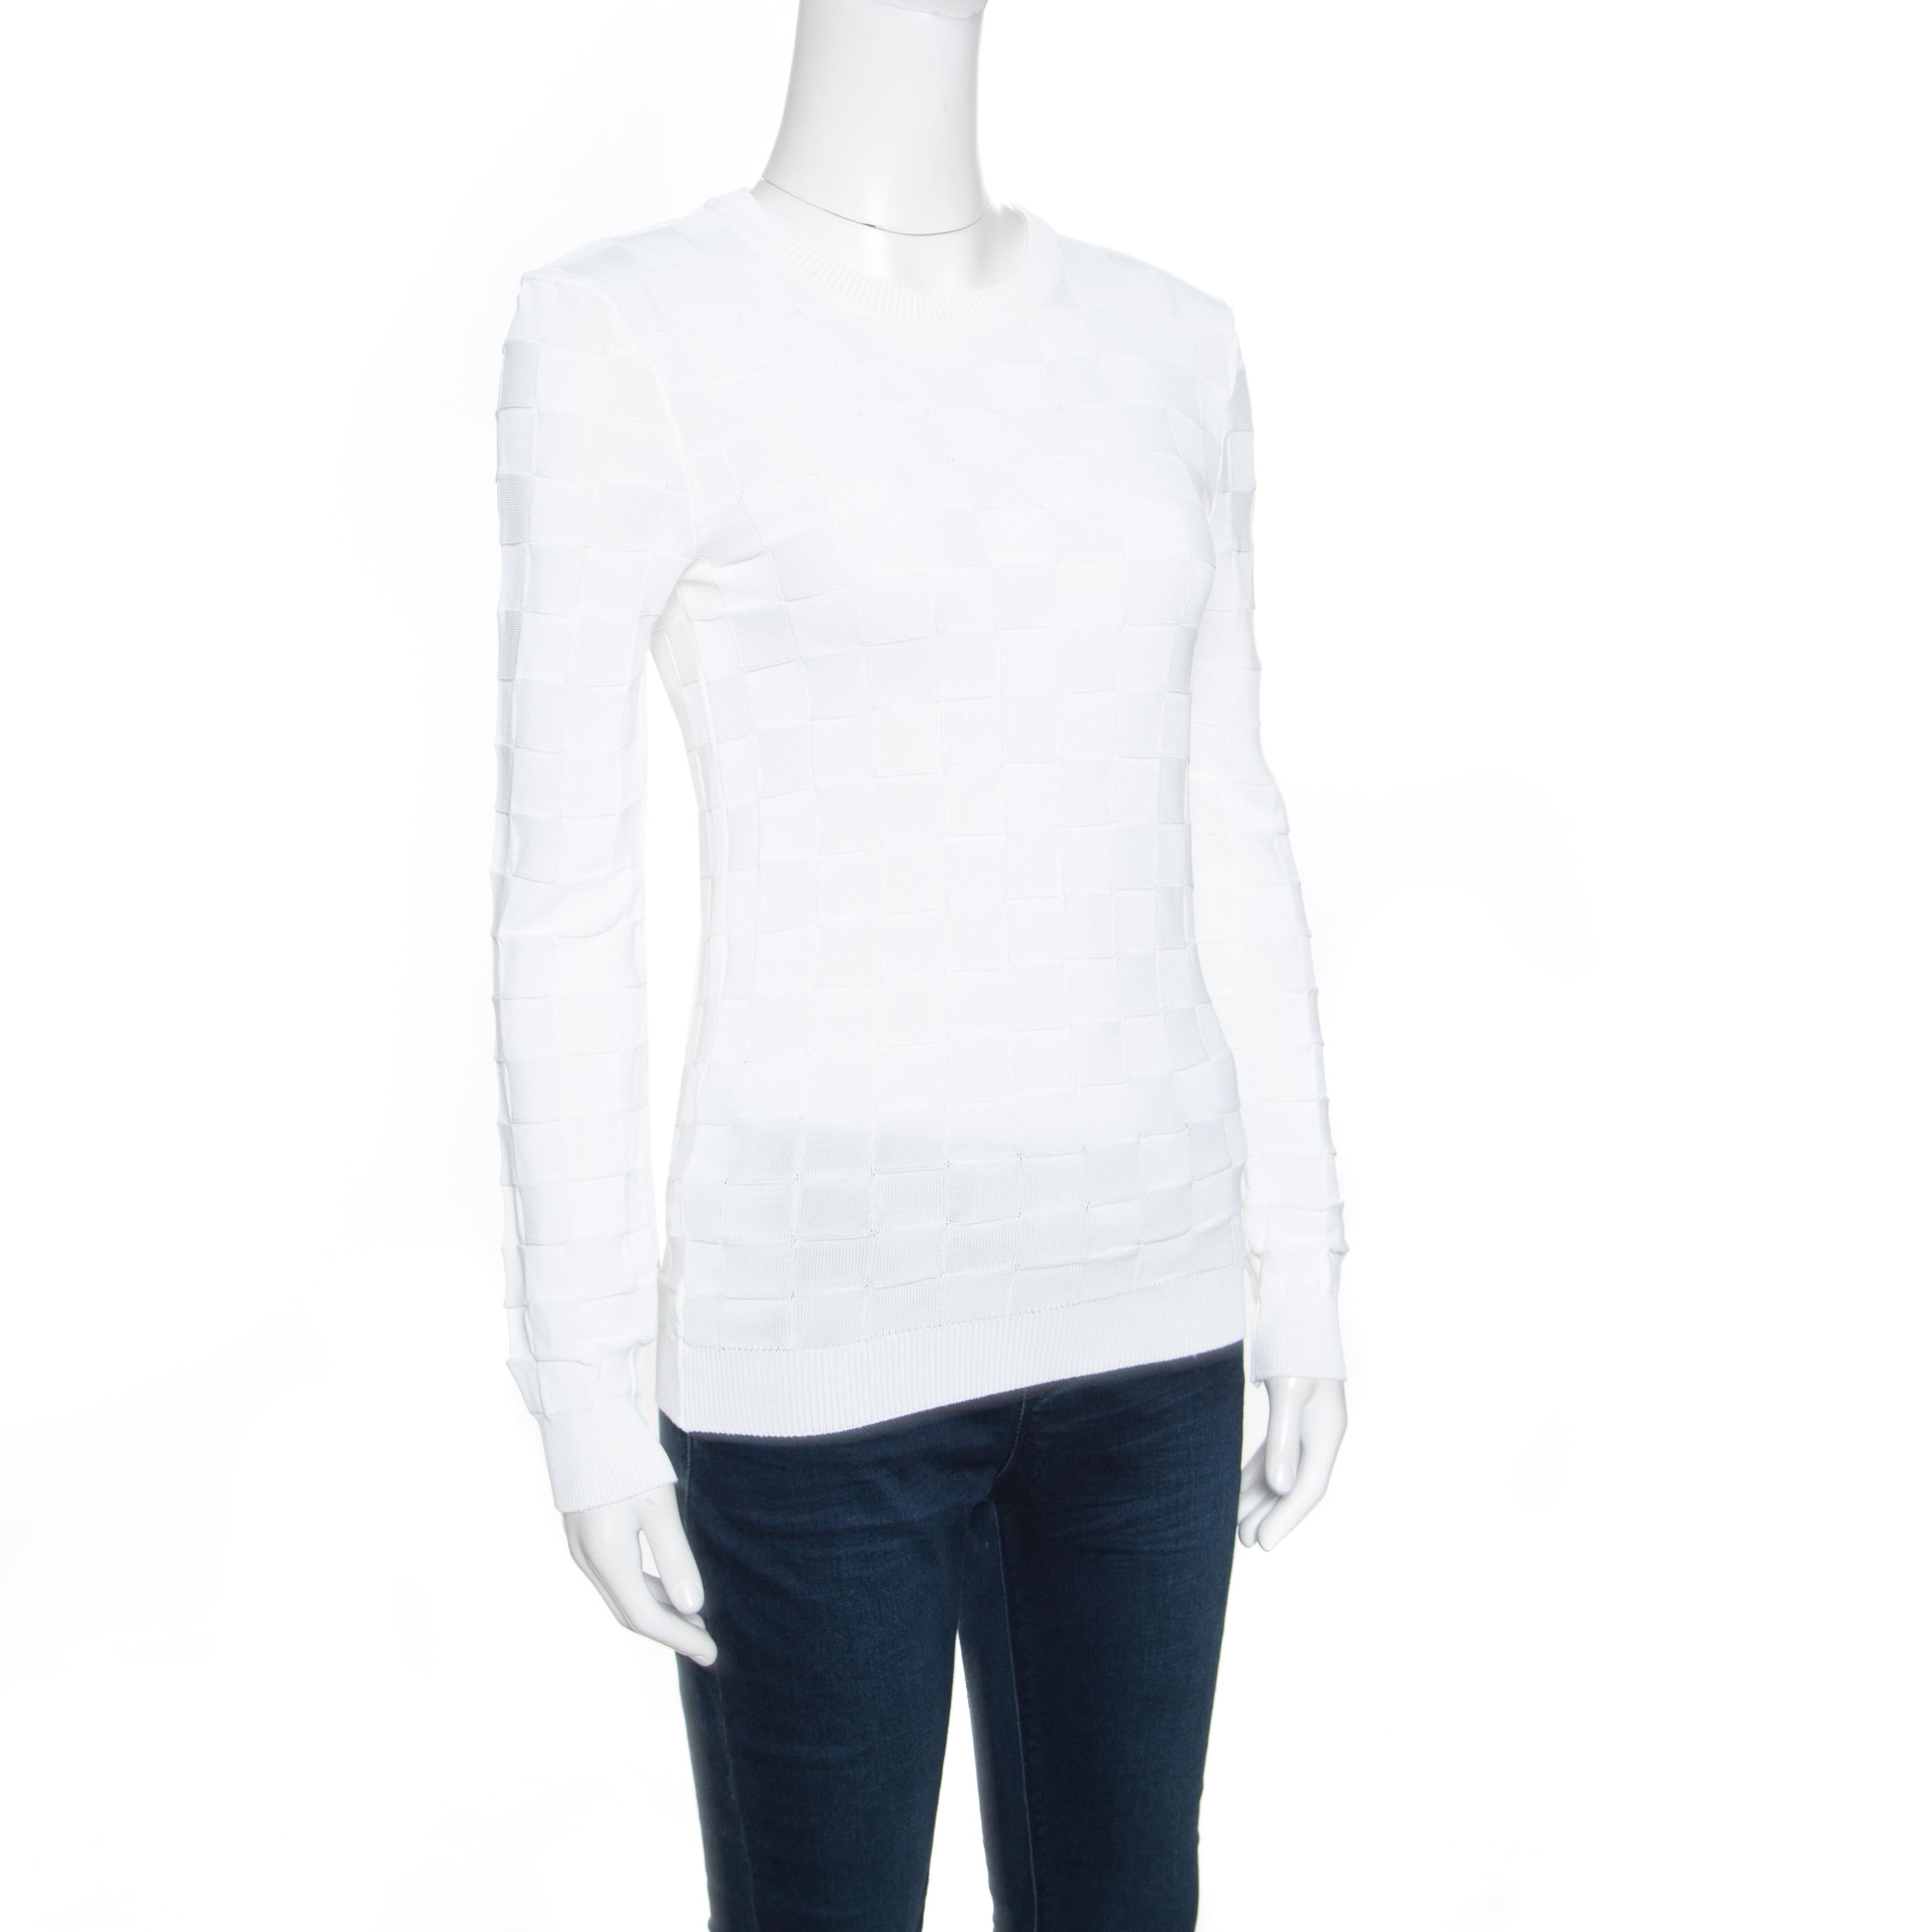 Balmain is known to create all that spells chic, classy and very modern! This white sweater is made of 100% viscose and features a simple structured silhouette. It flaunts a checkered knit pattern on it along with a crew neck and long sleeves. The